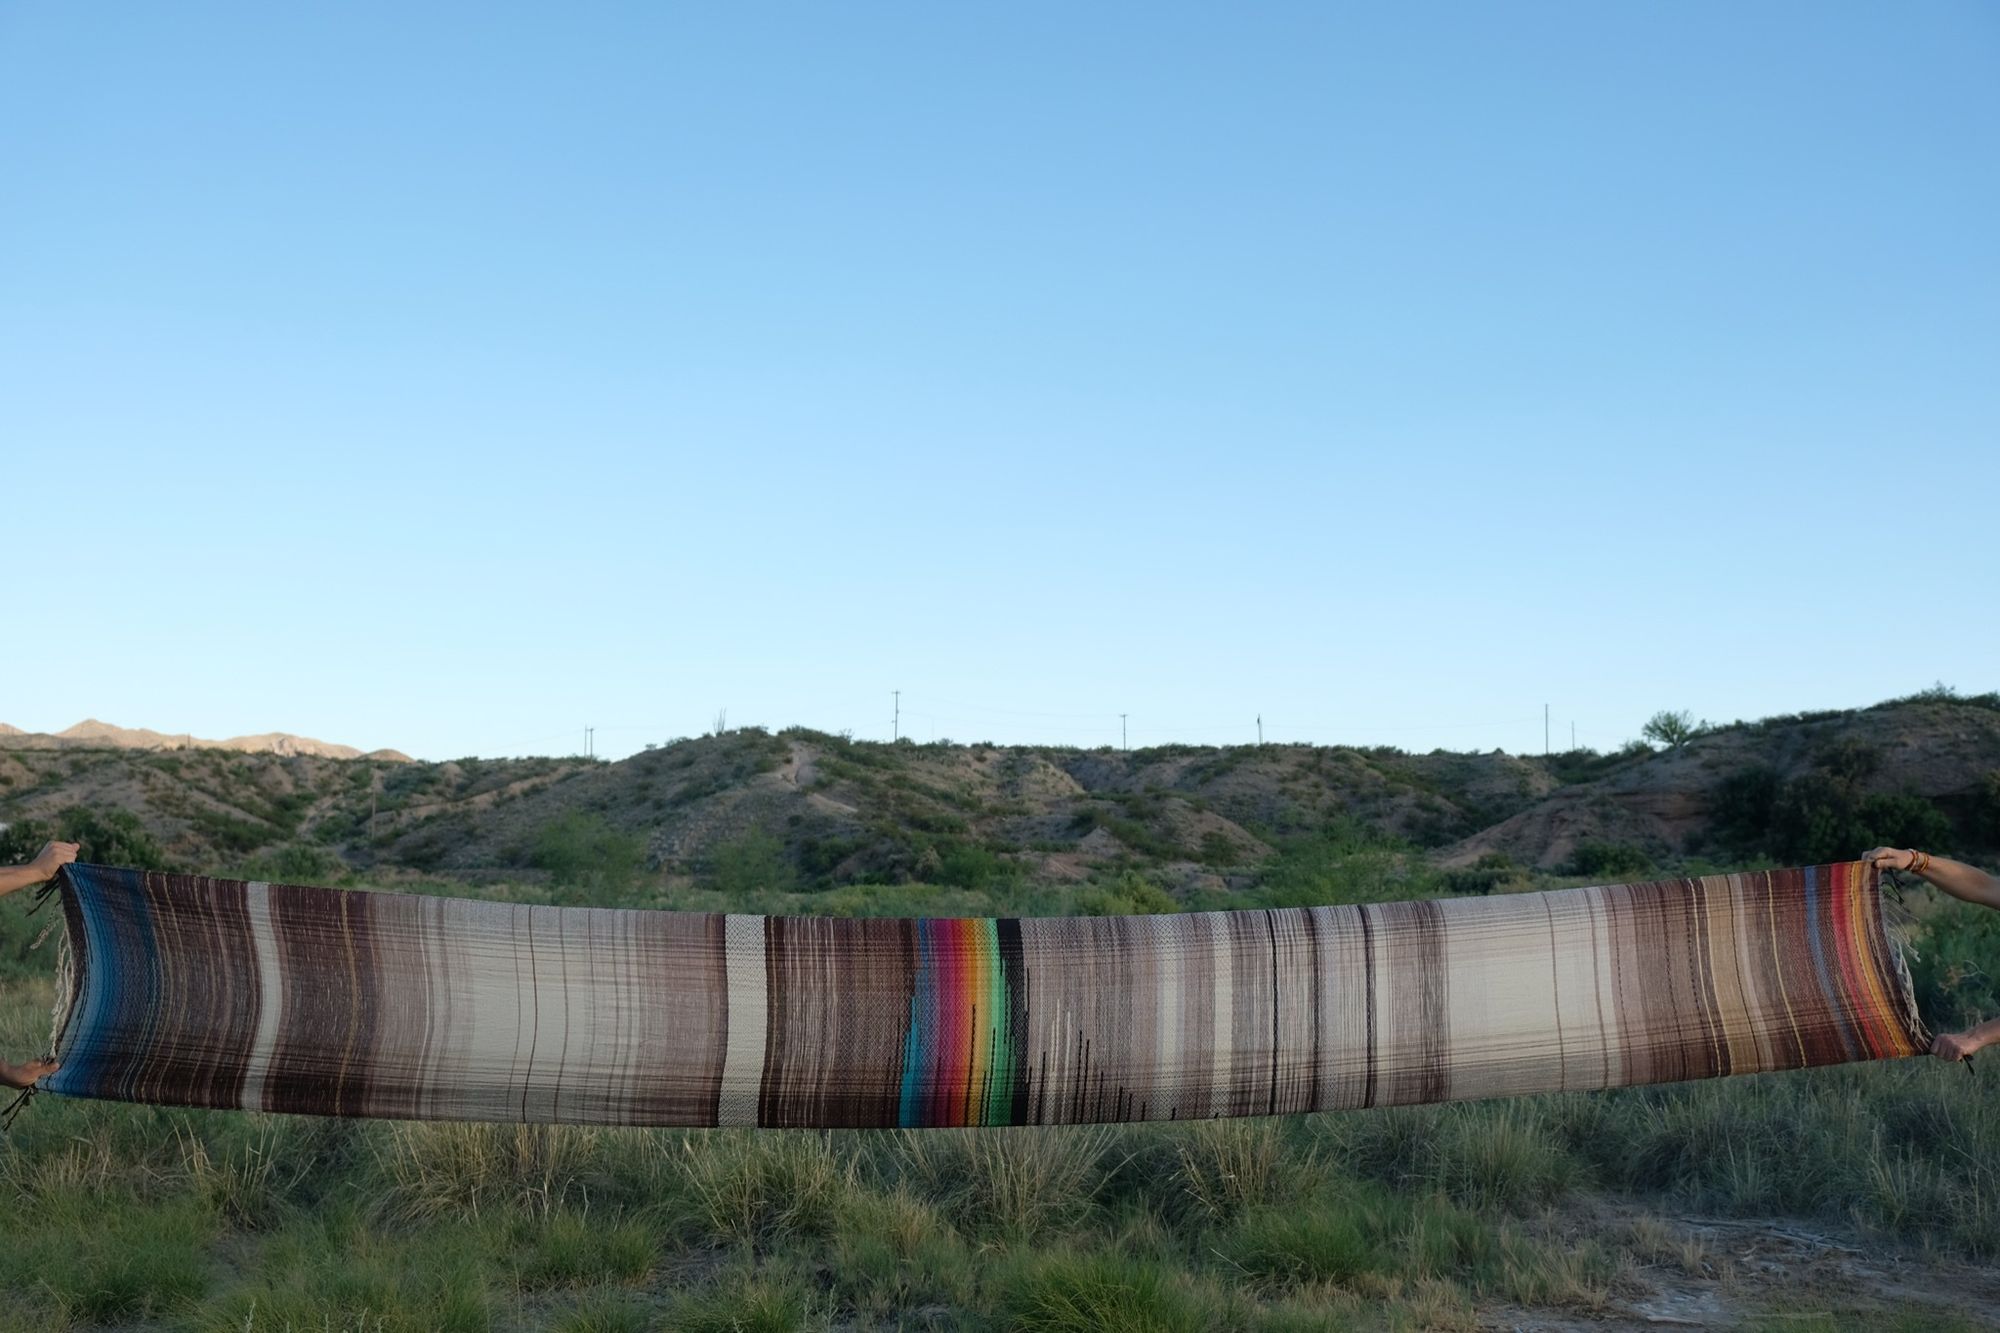 Multi colored handwoven raw silk fabric being held up by two people in the desert